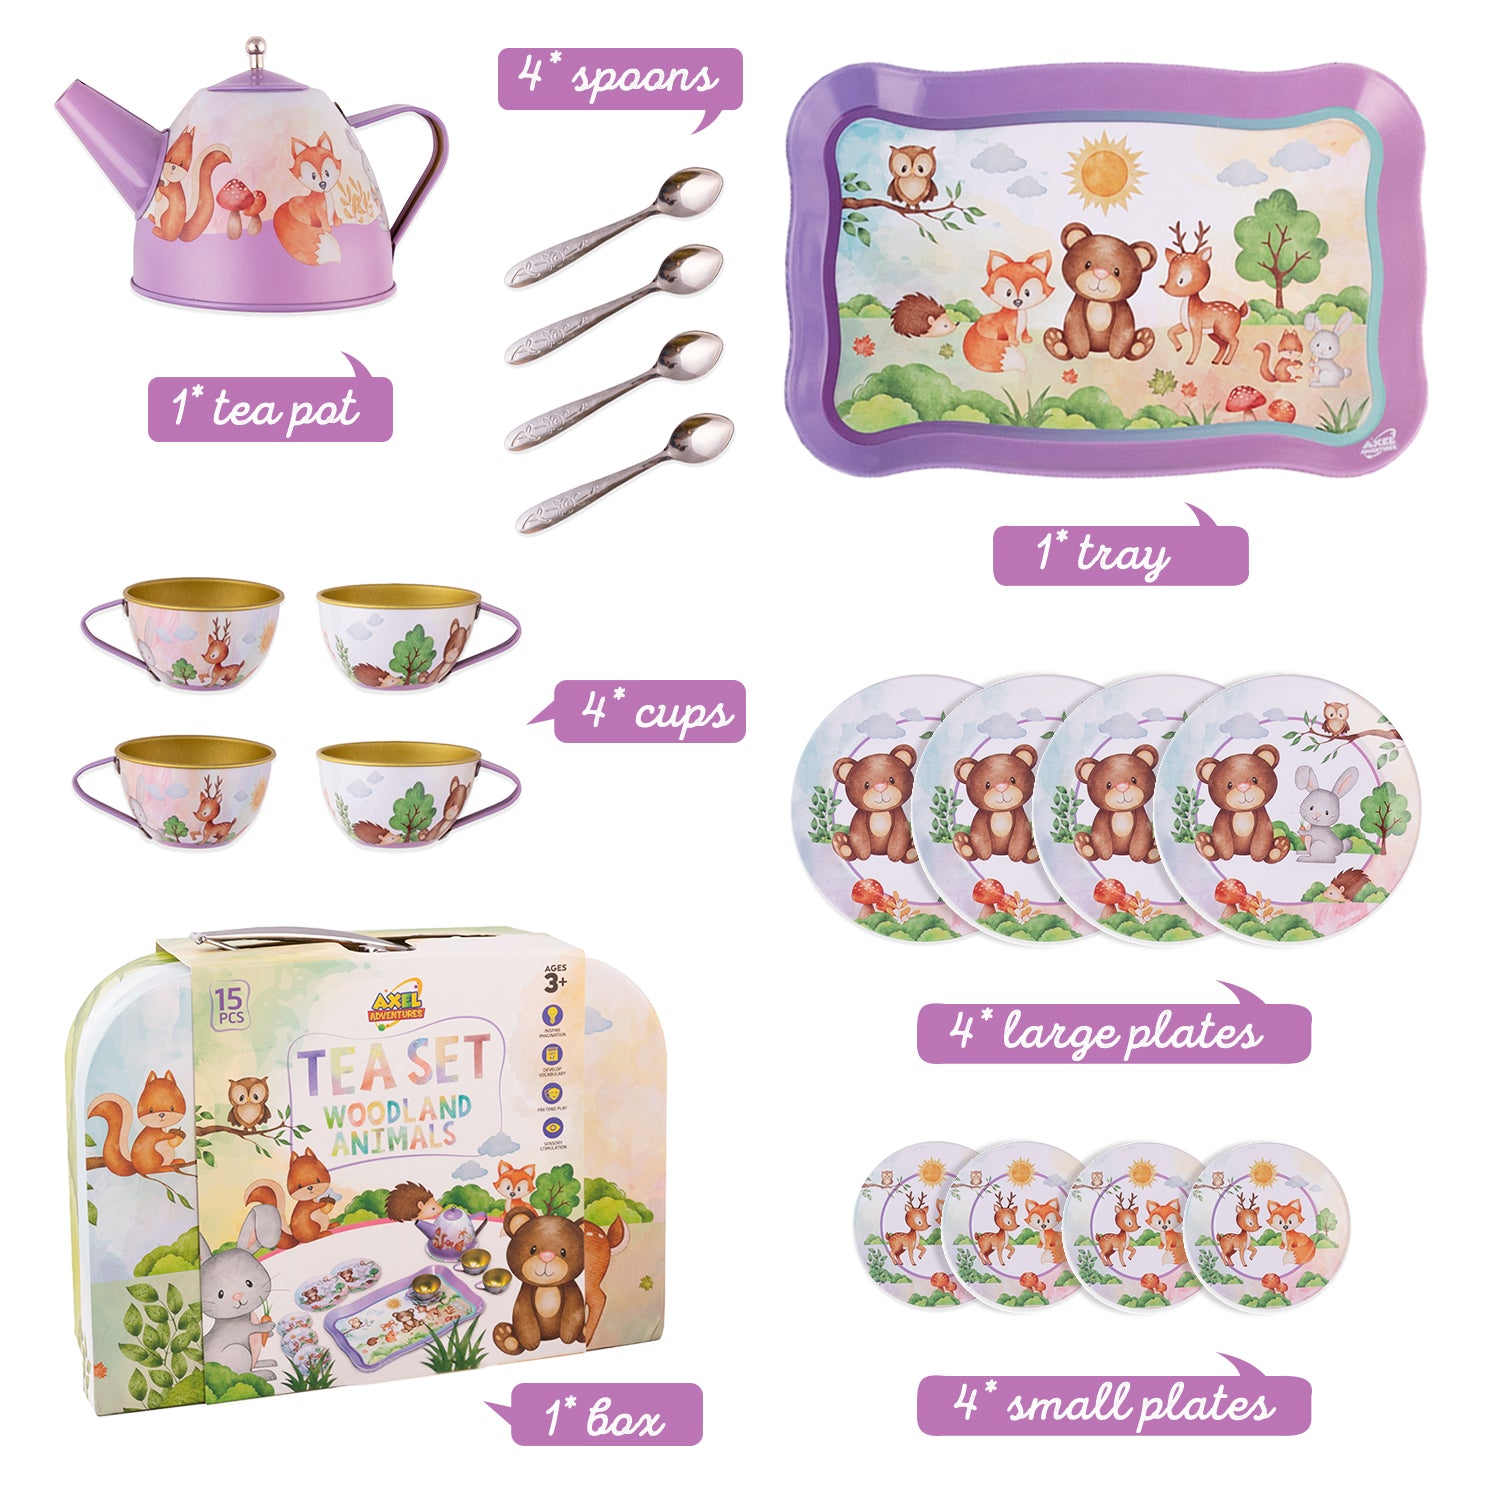 Woodland Animal Themed Pretend Play Tea Set for Little Girls - 15 PCS Tea Party Set for Kids Learning and Social Skills - Axel Adventures